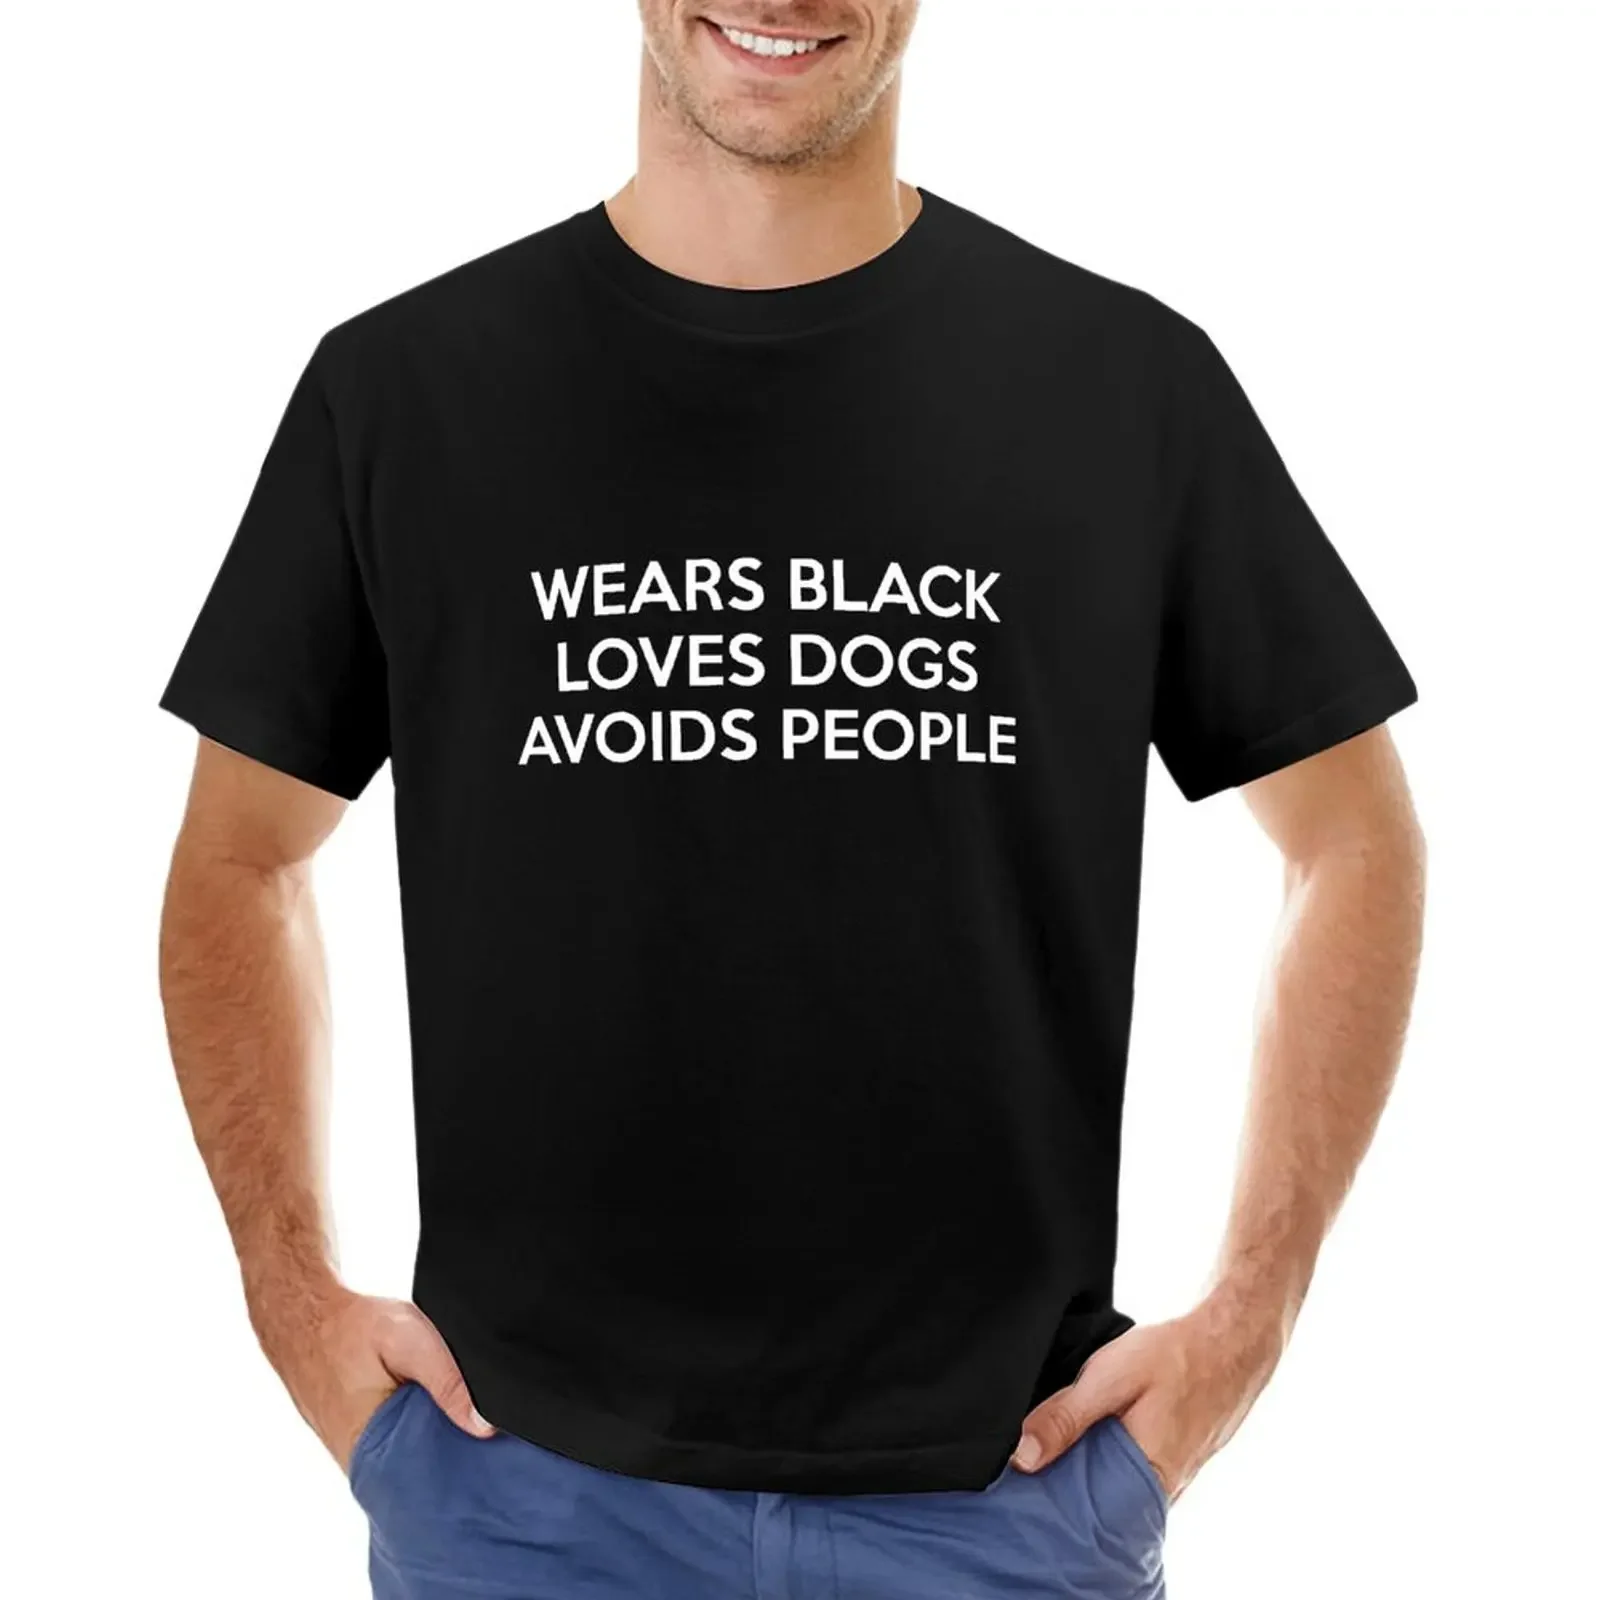 

Wears Black Loves Dogs Avoids People Shirt T-shirt plain tops boys animal print mens graphic t-shirts big and tall